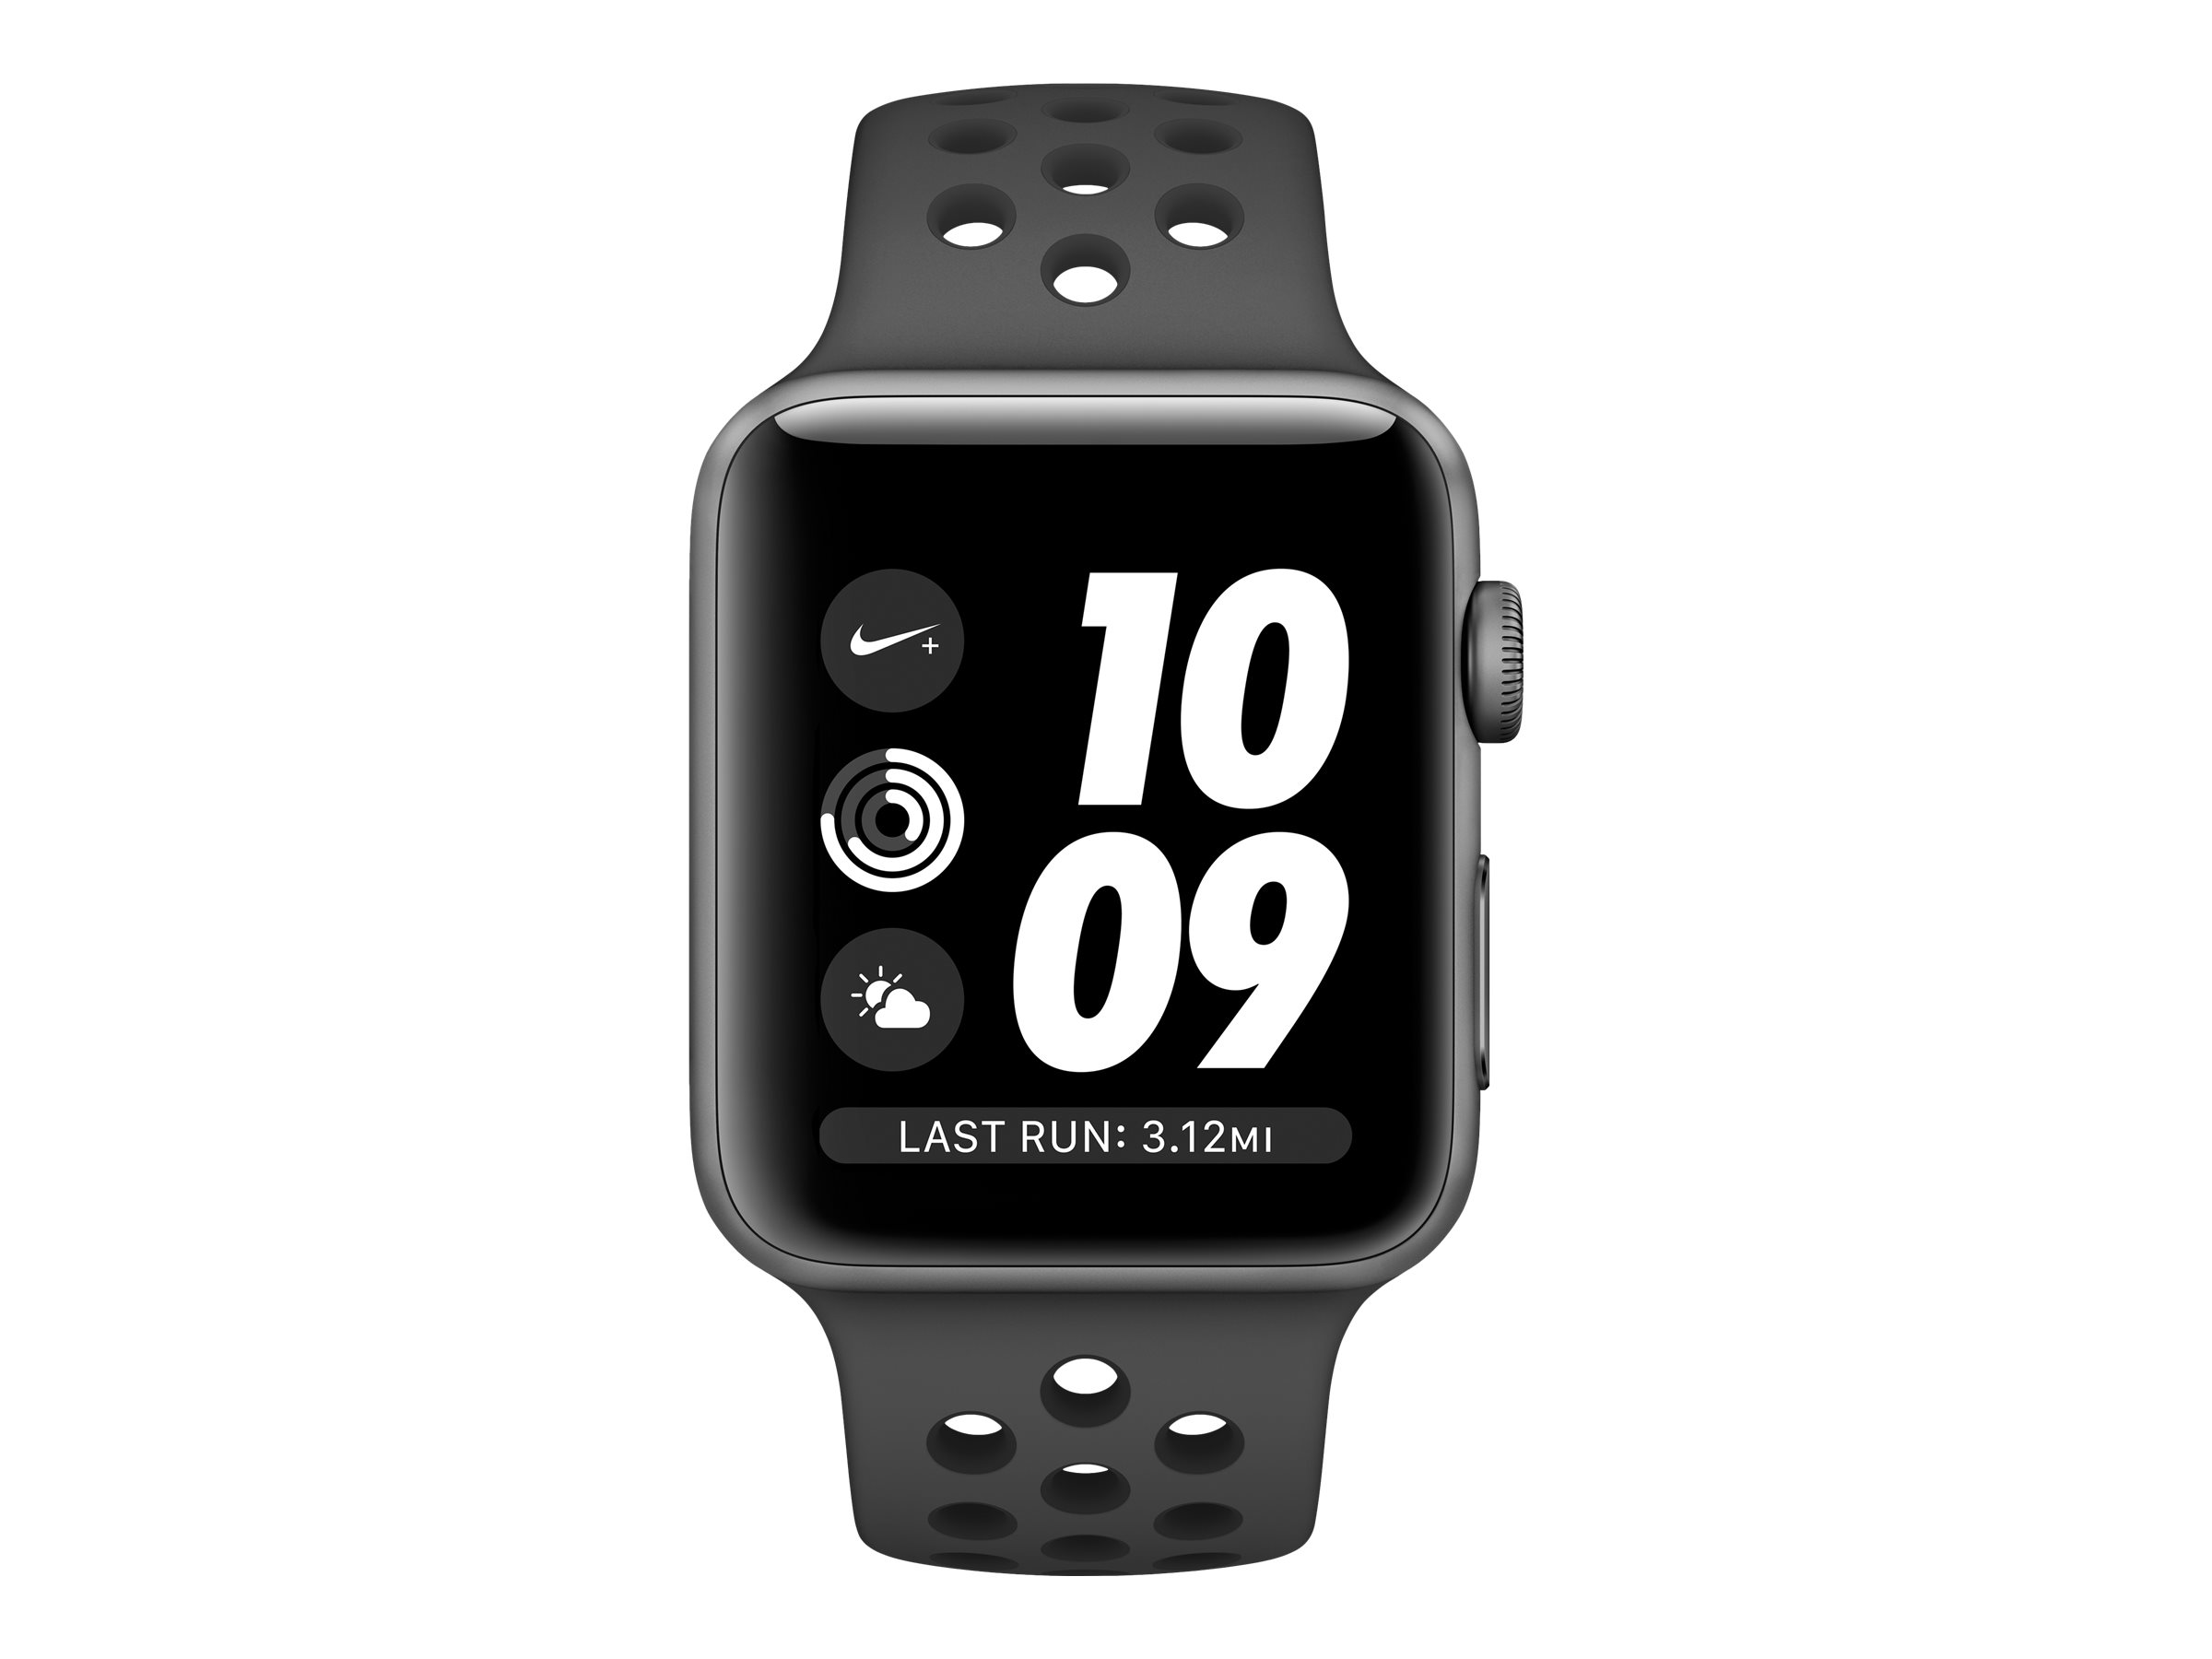 Apple Watch Nike+ Series 3 (GPS) - full specs, details and review